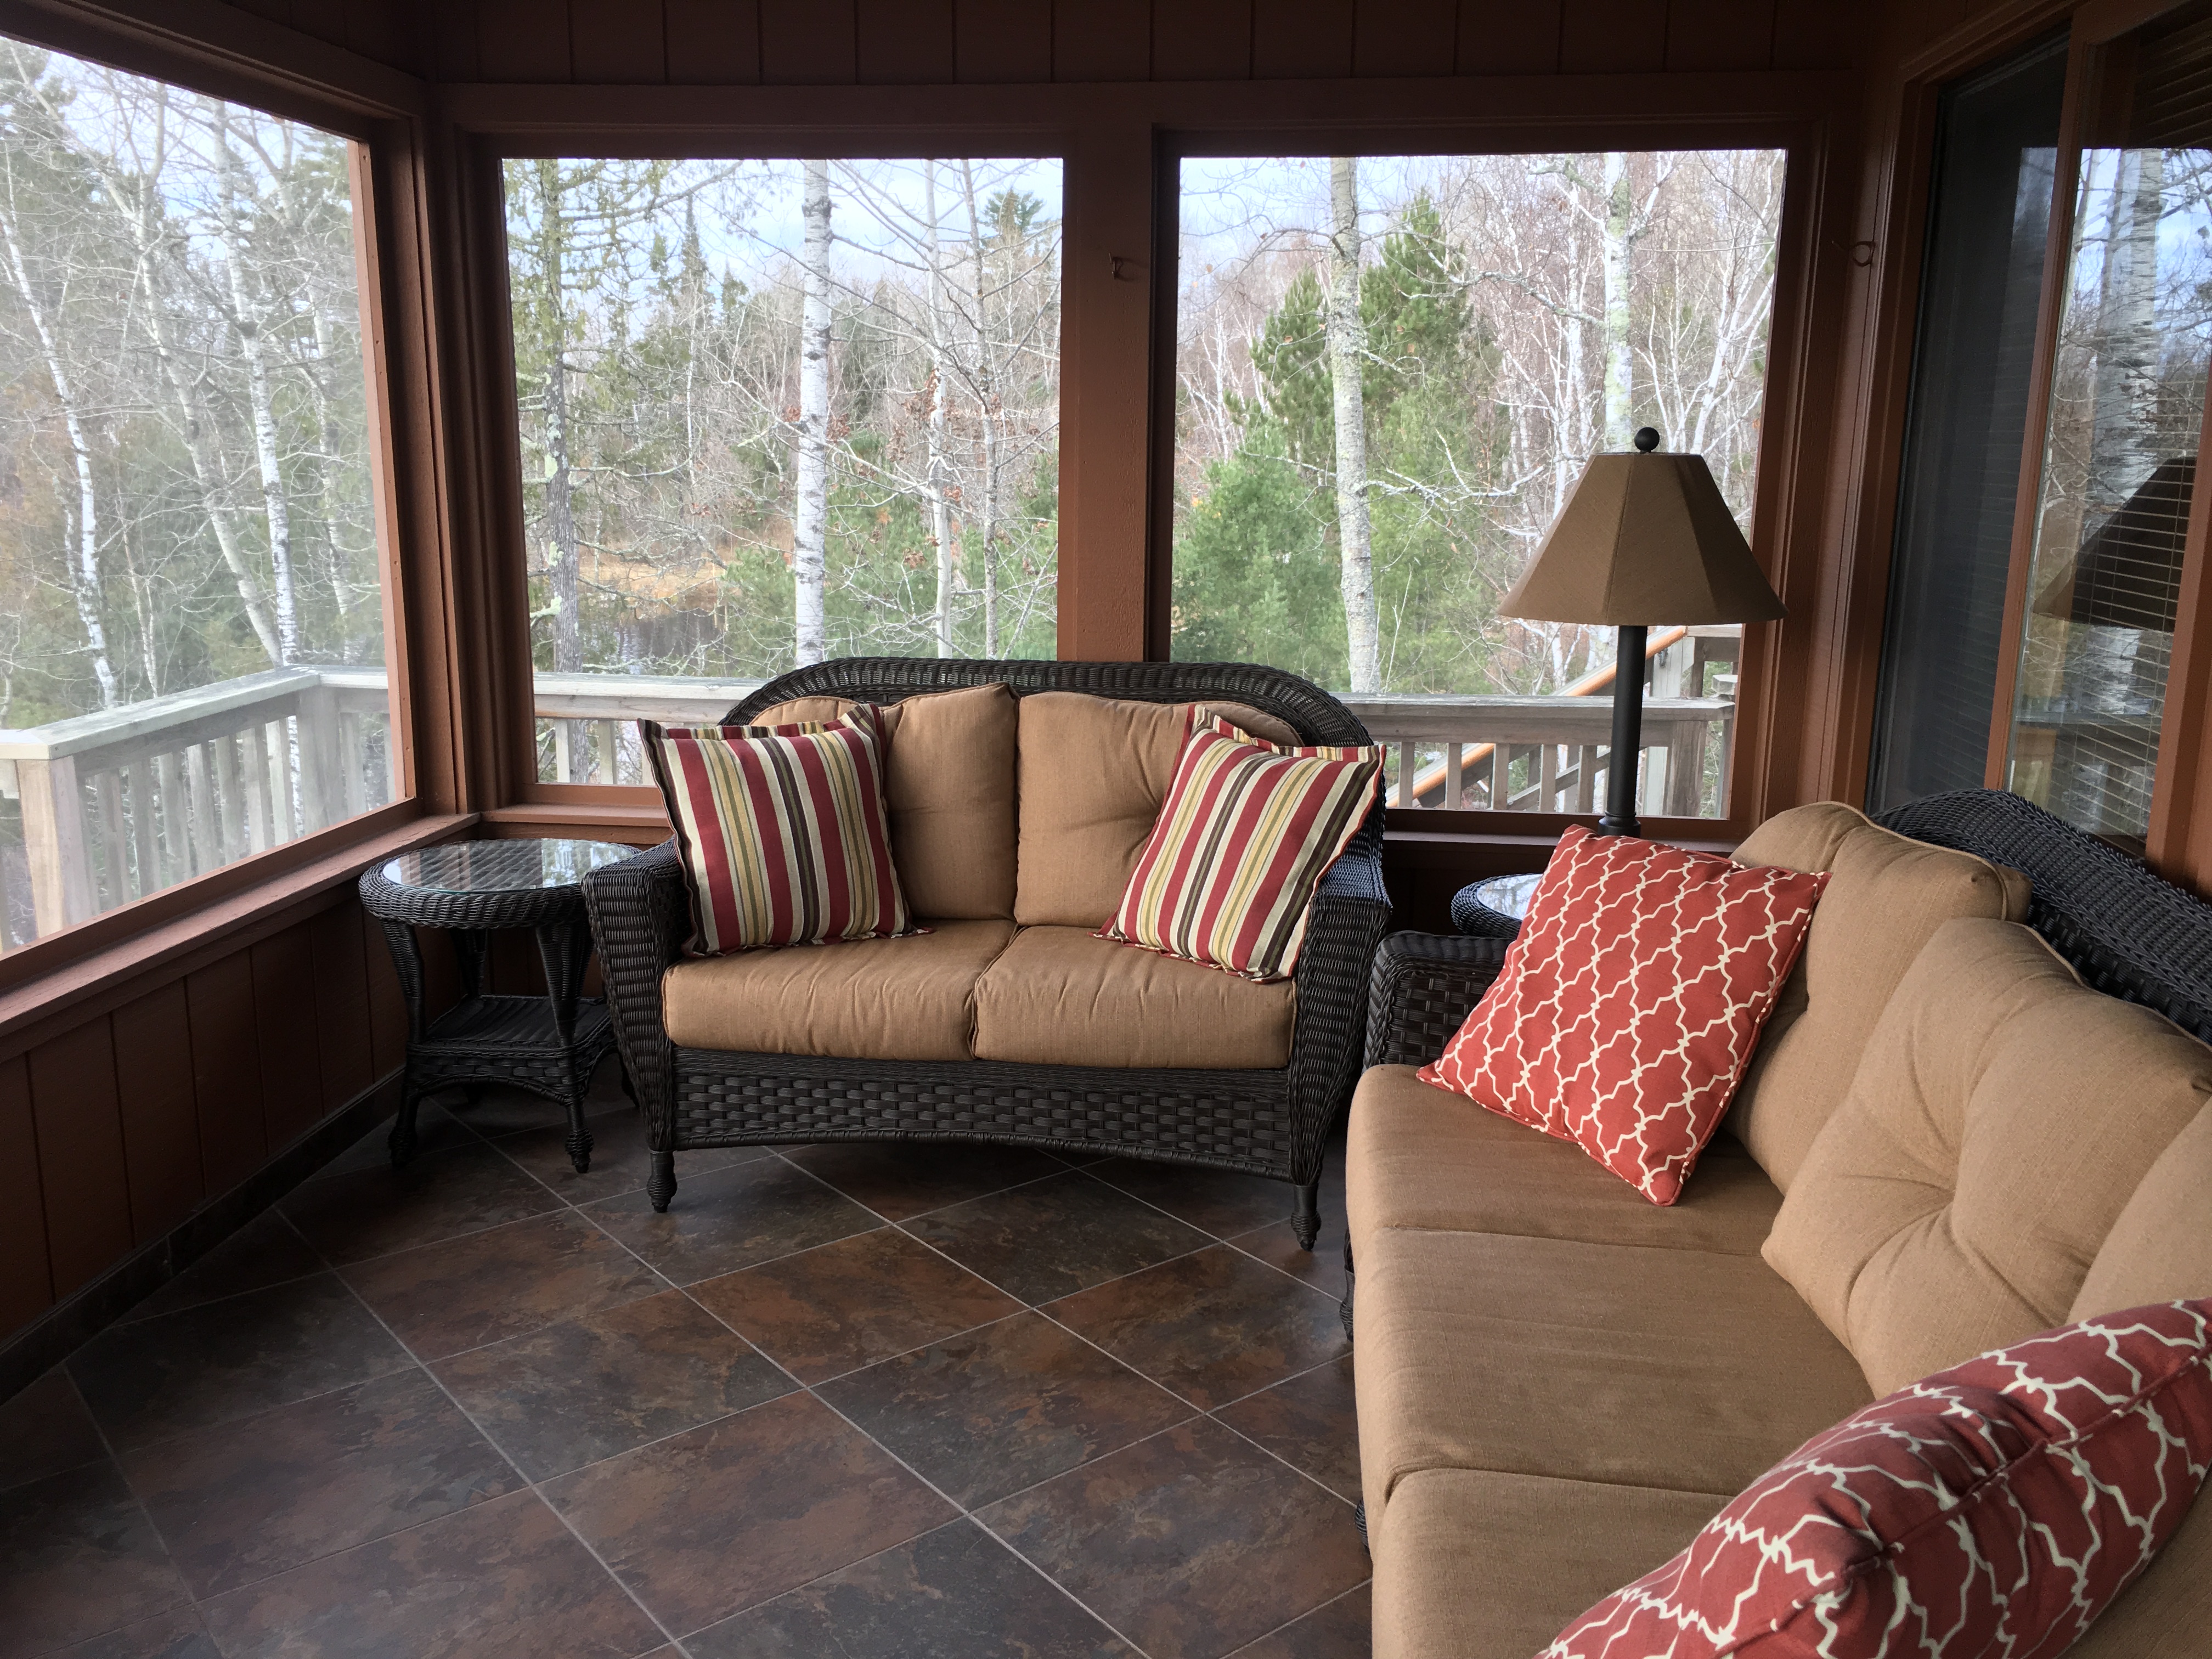 Minnesota Vacation Home Cabins-River Point Resort-Ely Minnesota Cabins Screen Porch